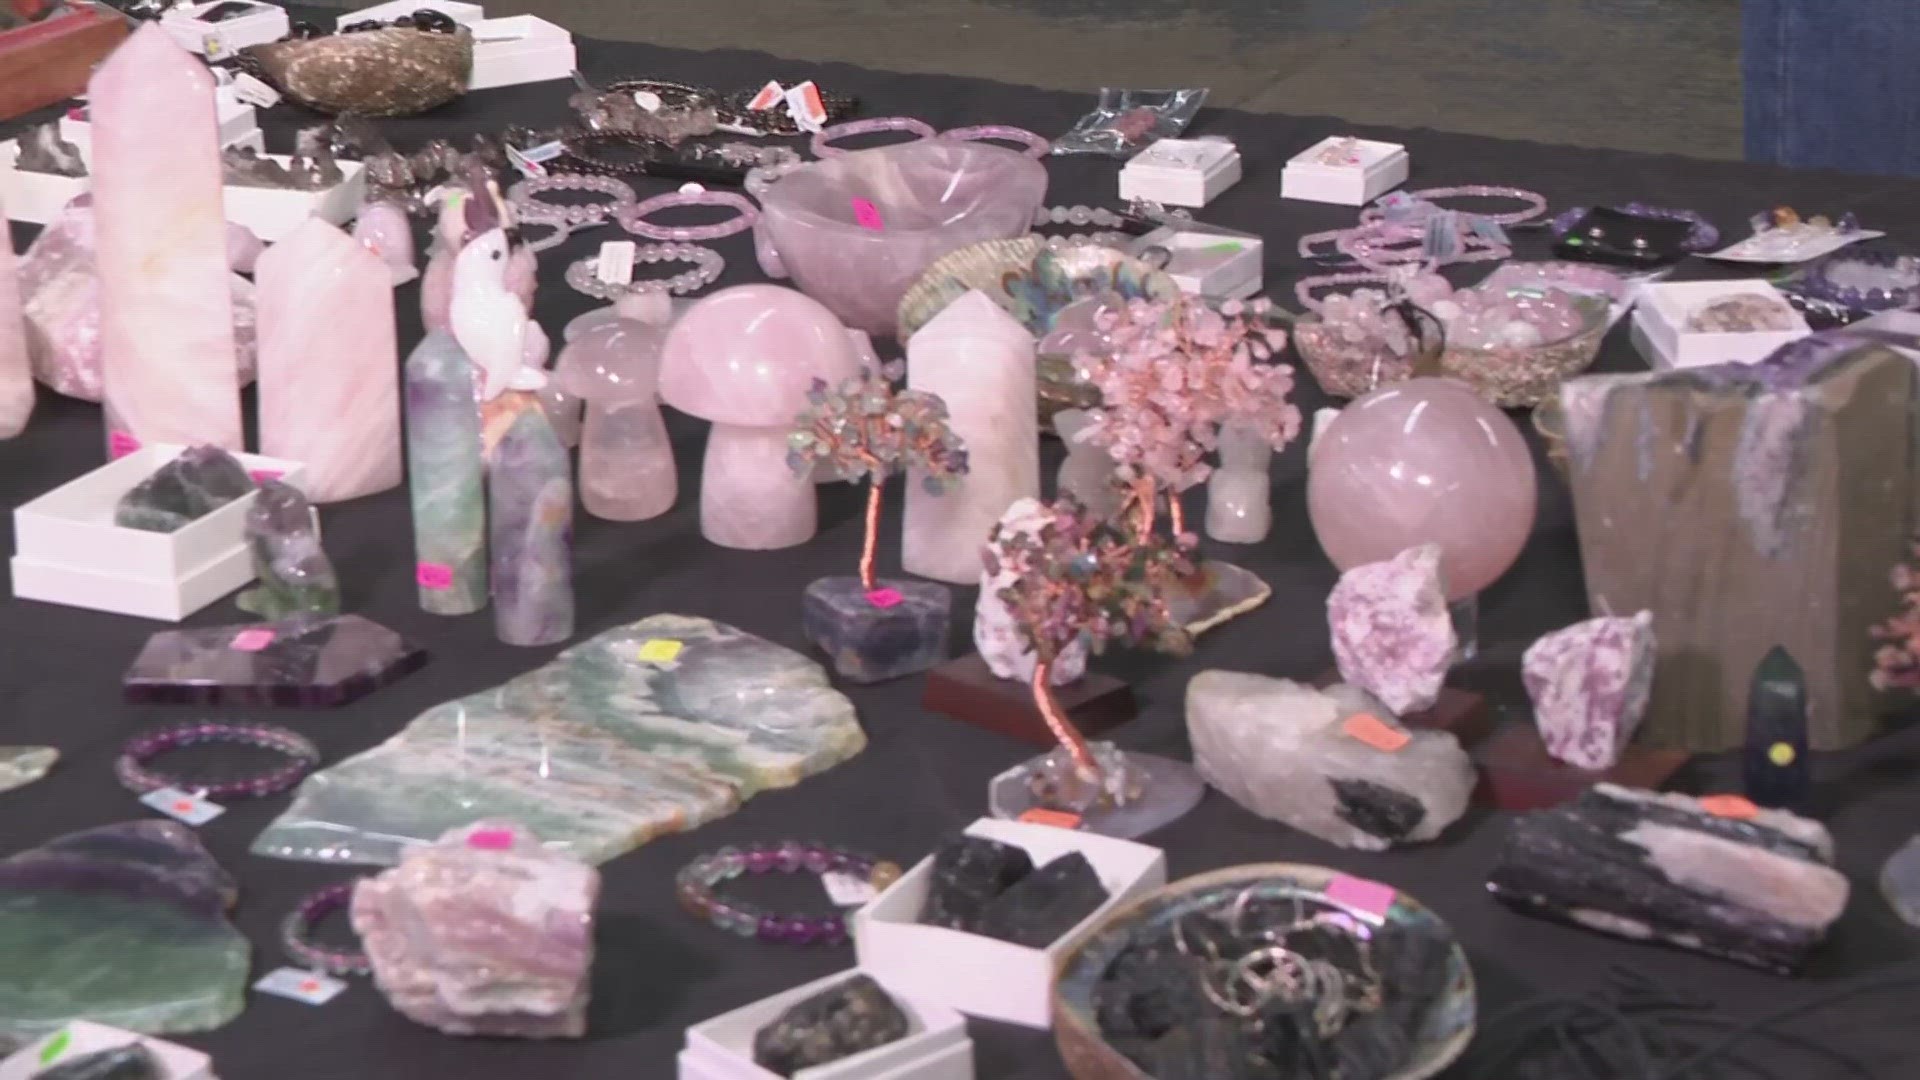 3News' Kierra Cotton previewed the Halloween Psychic & Holistic Expo that is taking place in Canton.